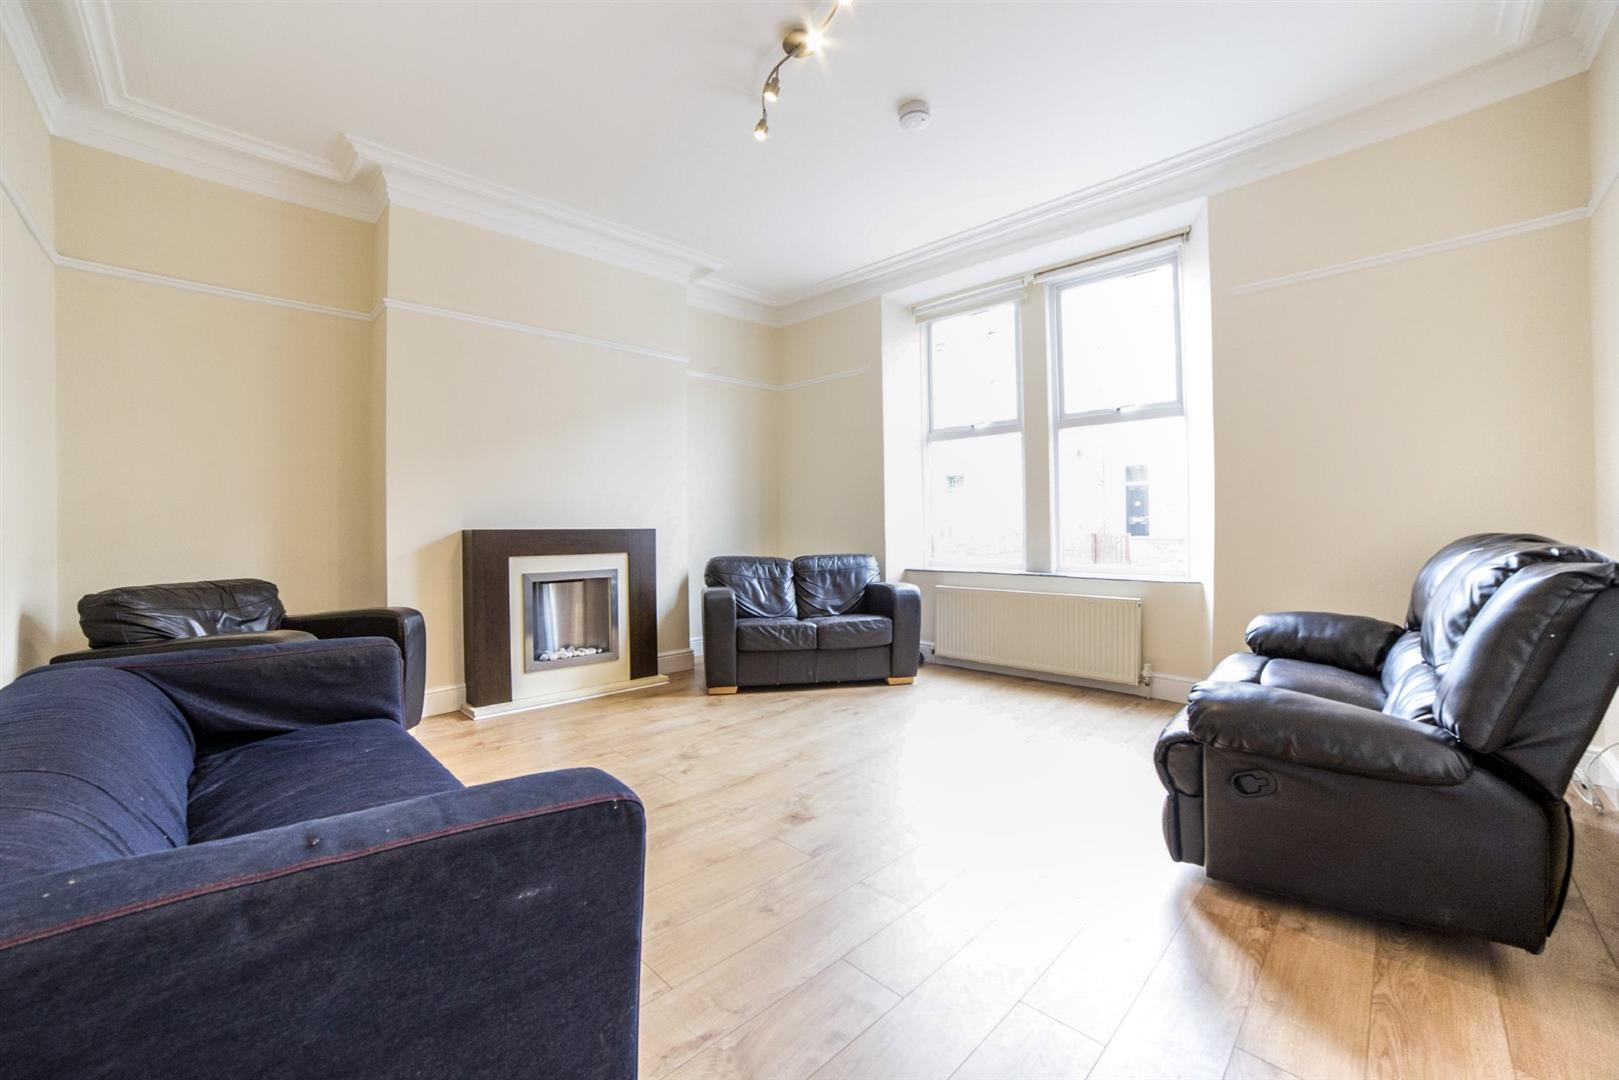 6 bed terraced house to rent in Chester Street, Sandyford - Property Image 1